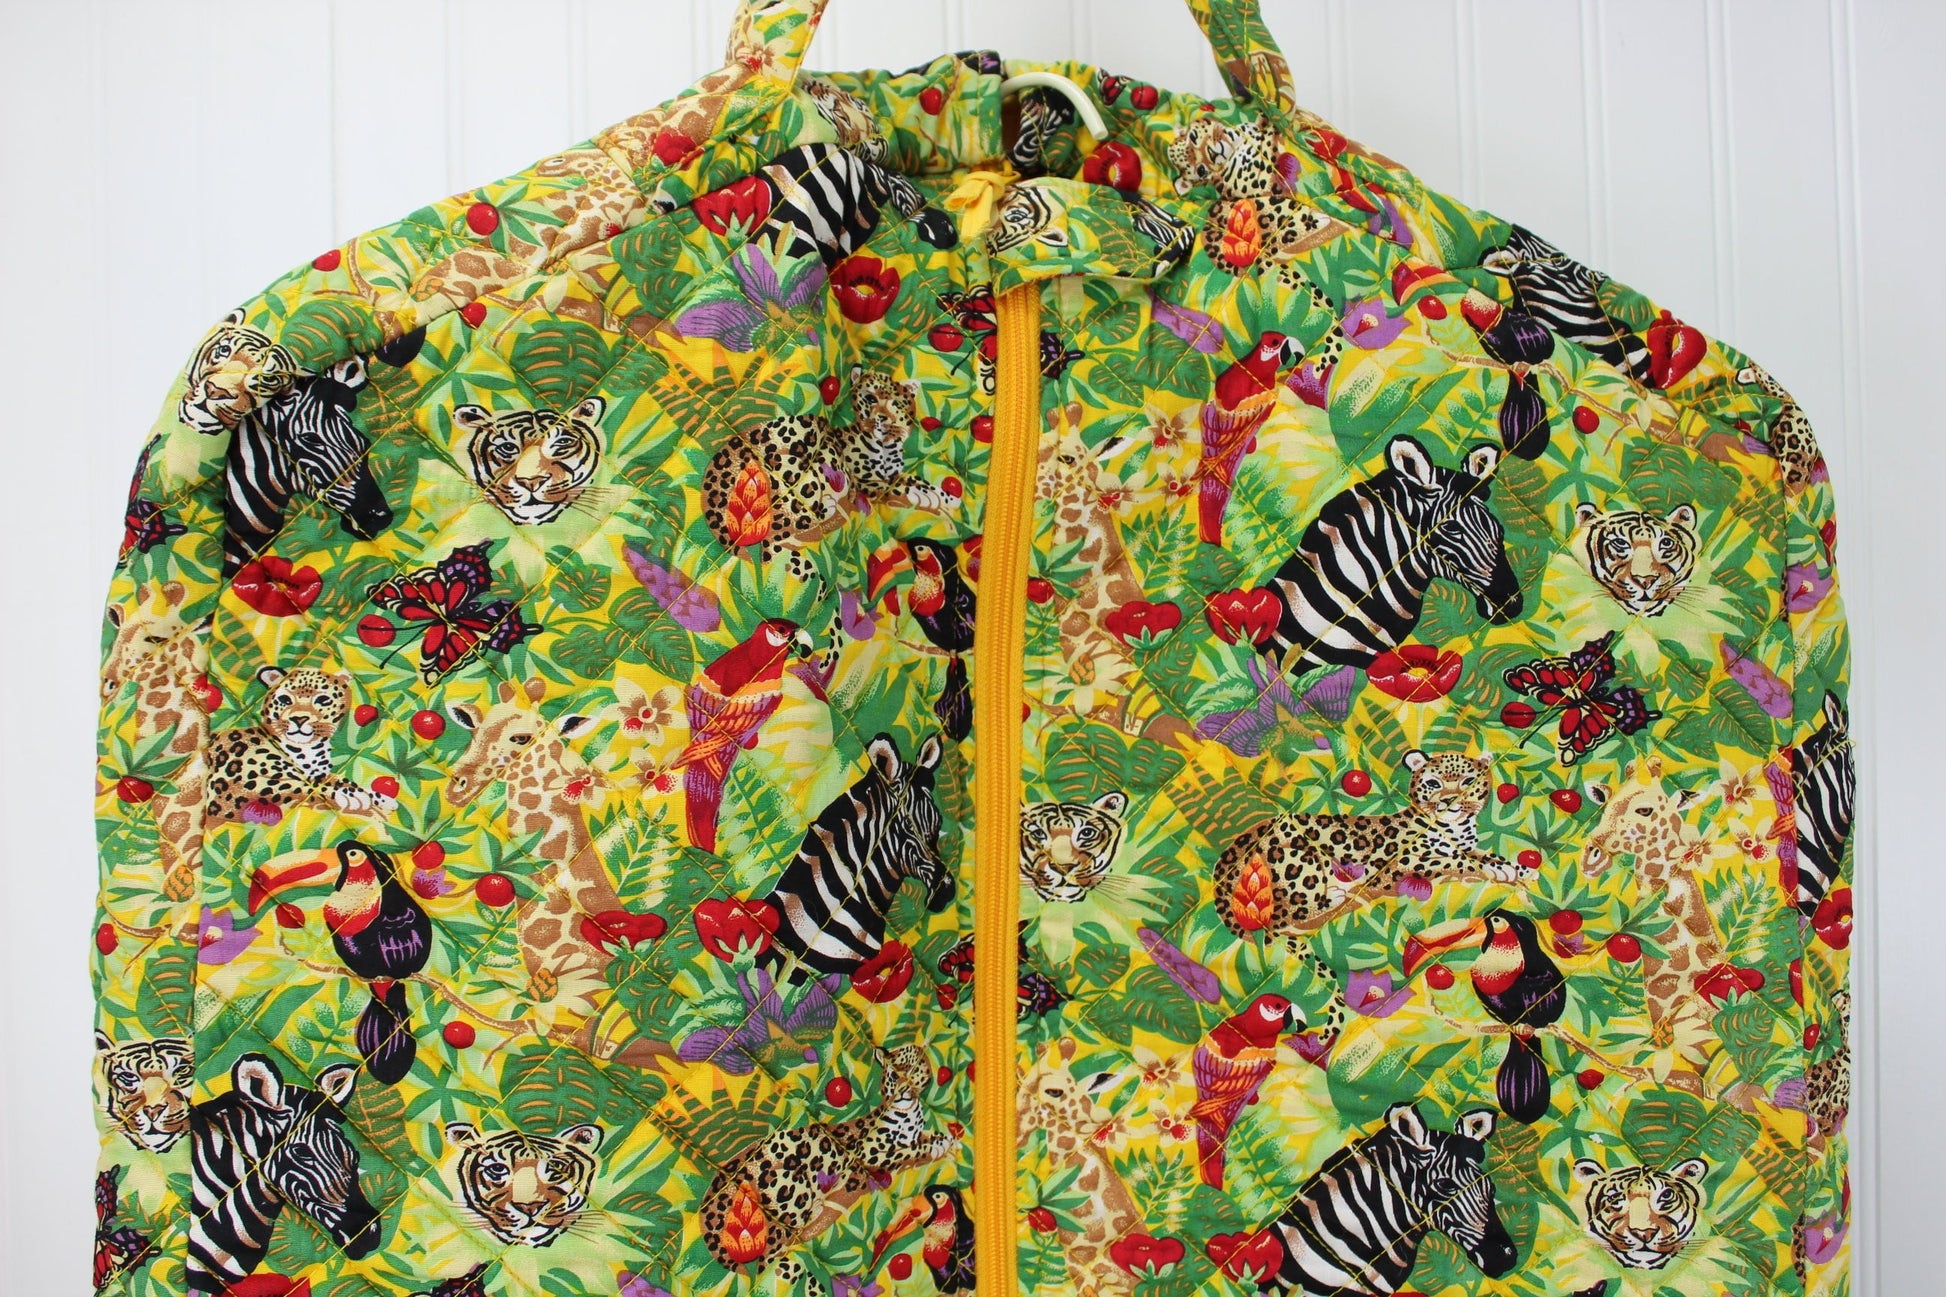 Unbranded Jungle Scene Fabric Garment Carrier Hanging Overnighter - Zebra Toucan cotton quilted